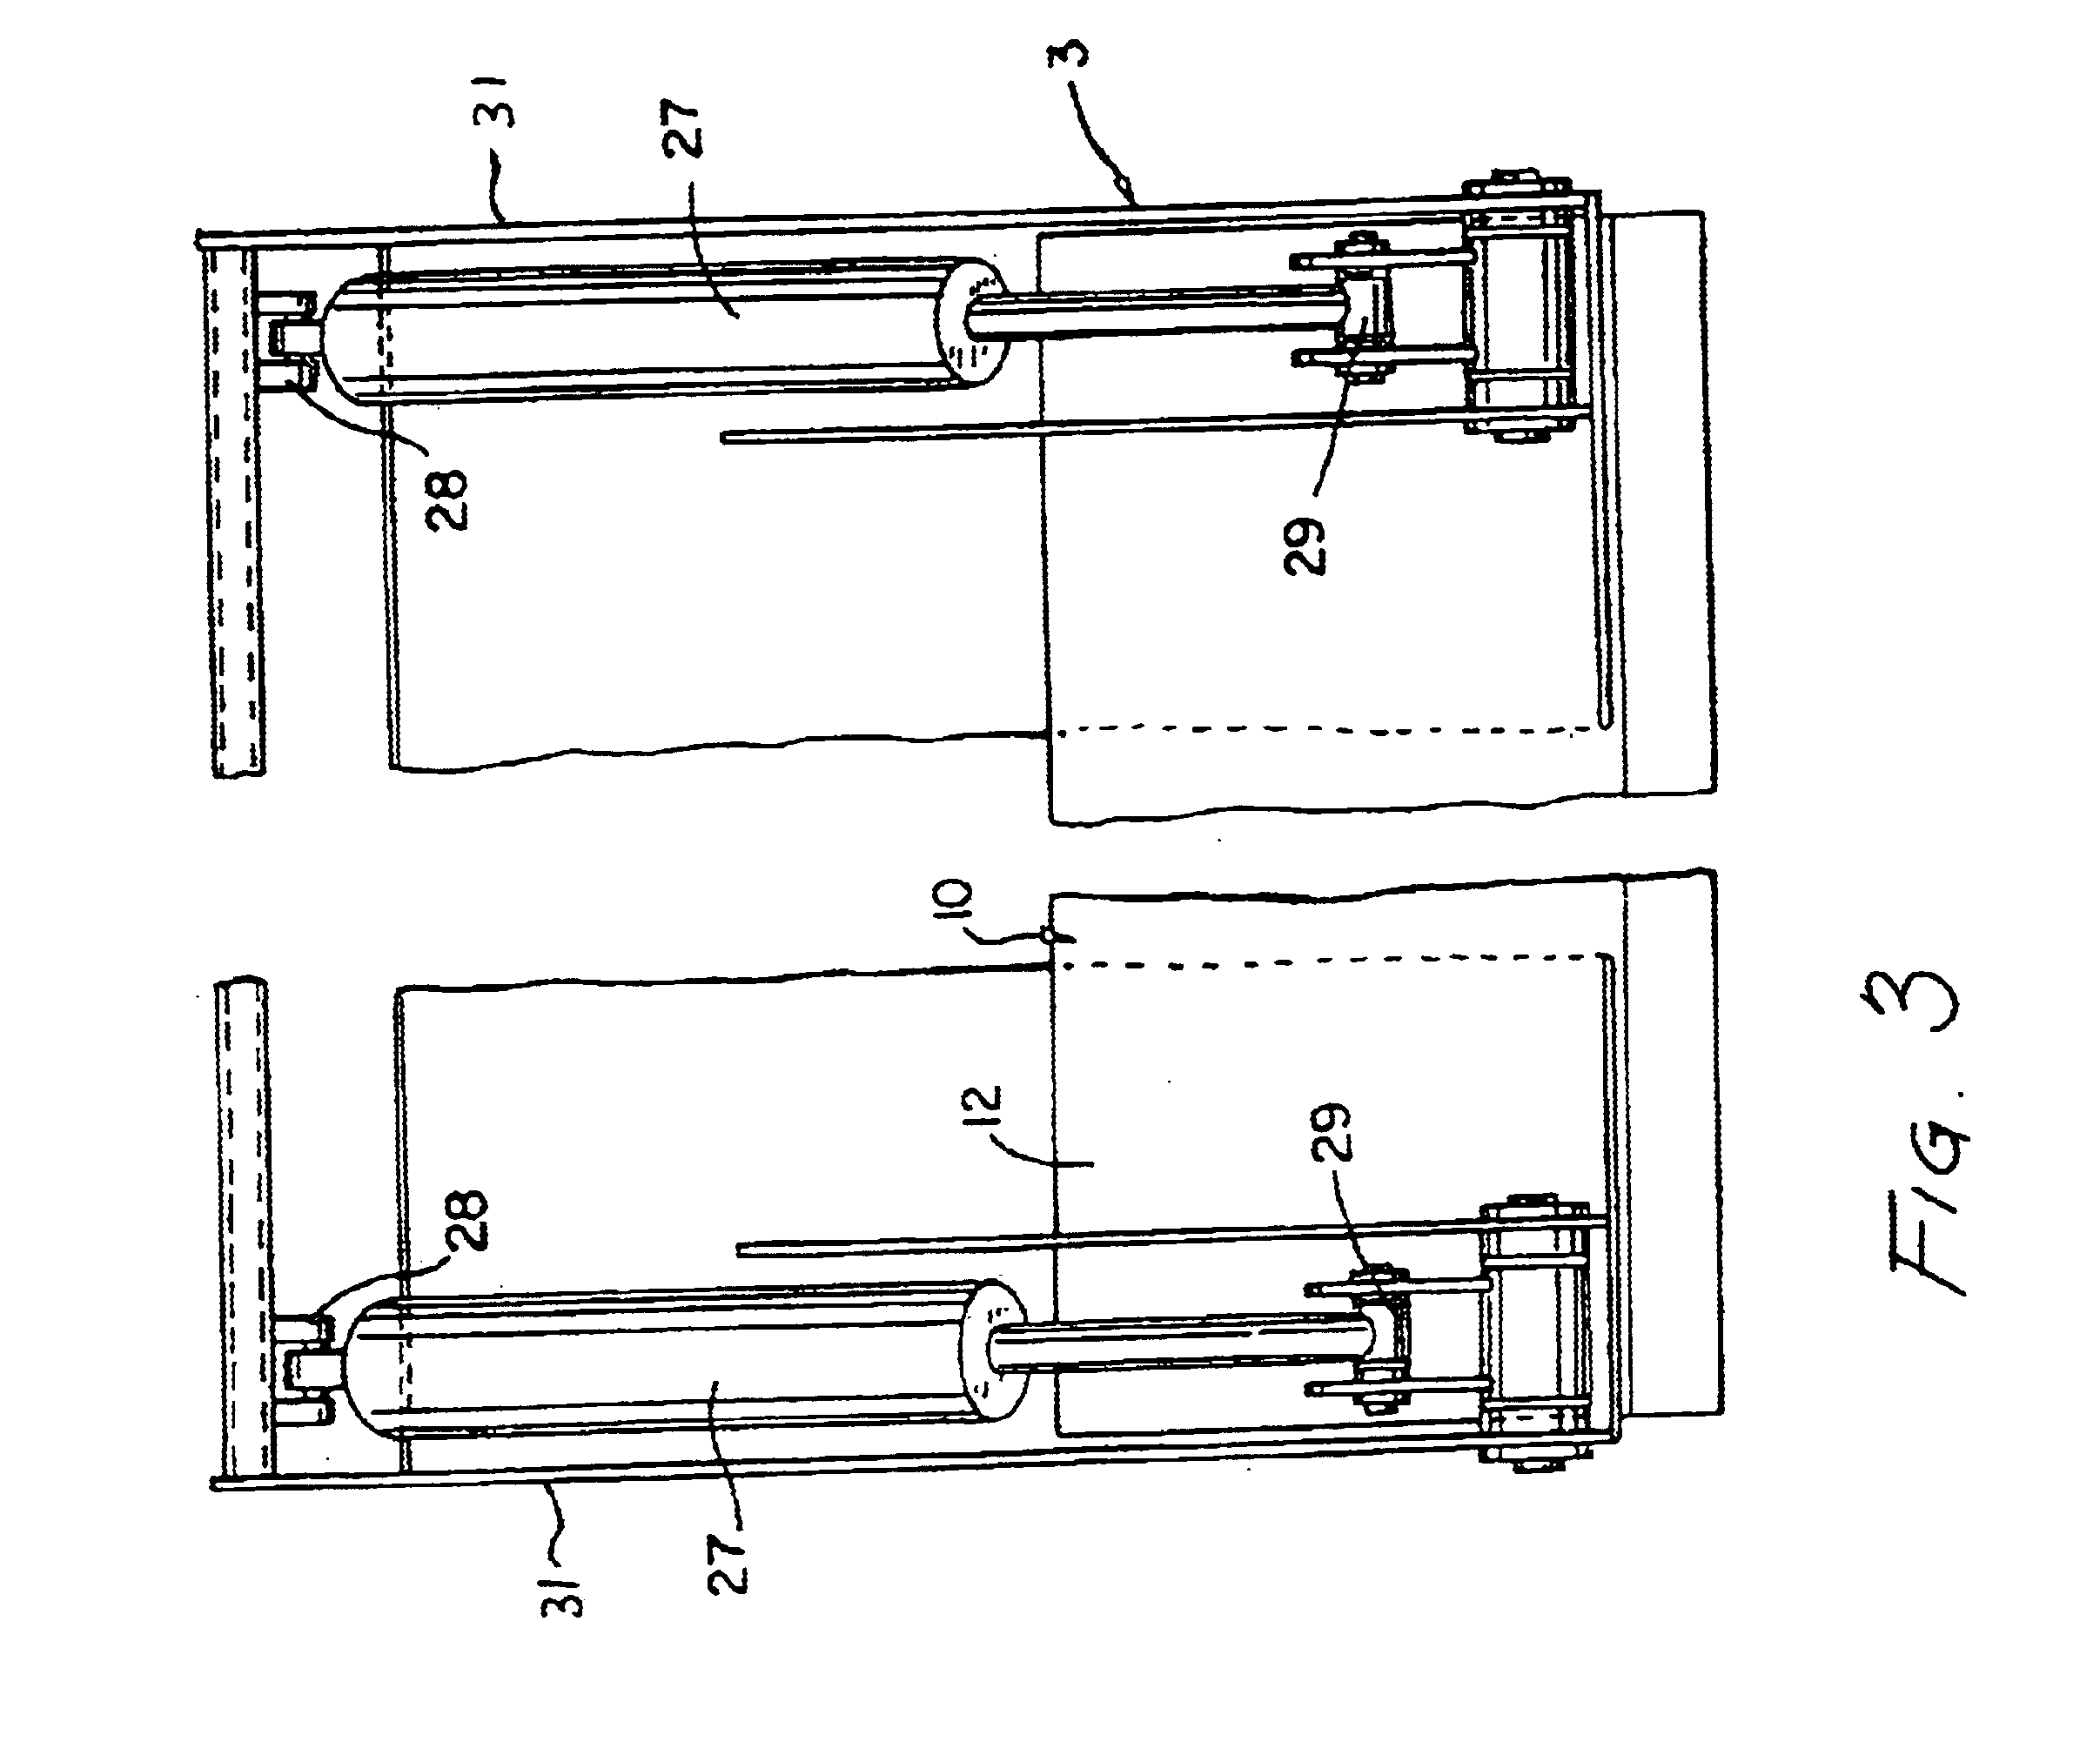 Refuse receptacle having a charging hopper and moving floor and method therefor